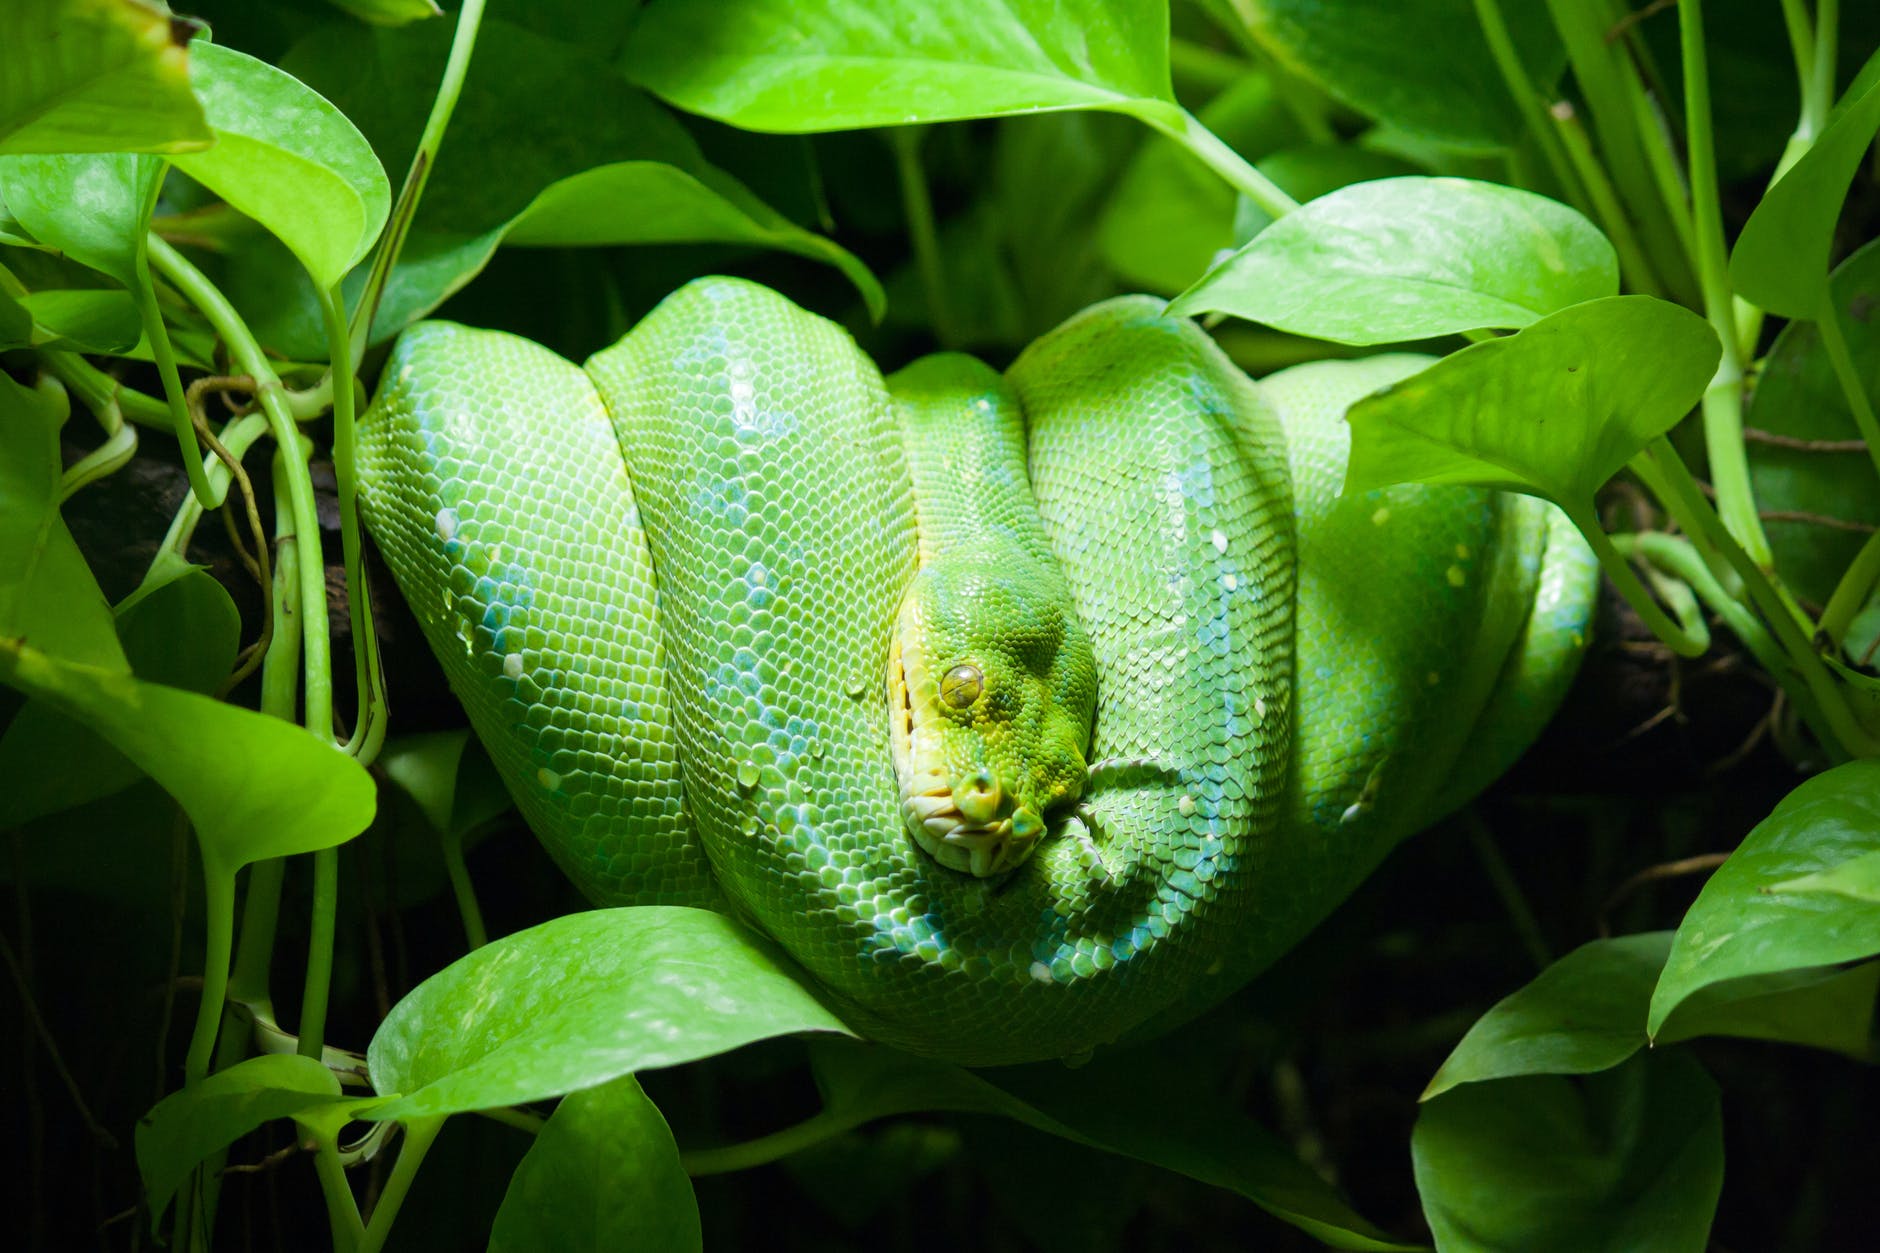 close up photo of green snake on leaves